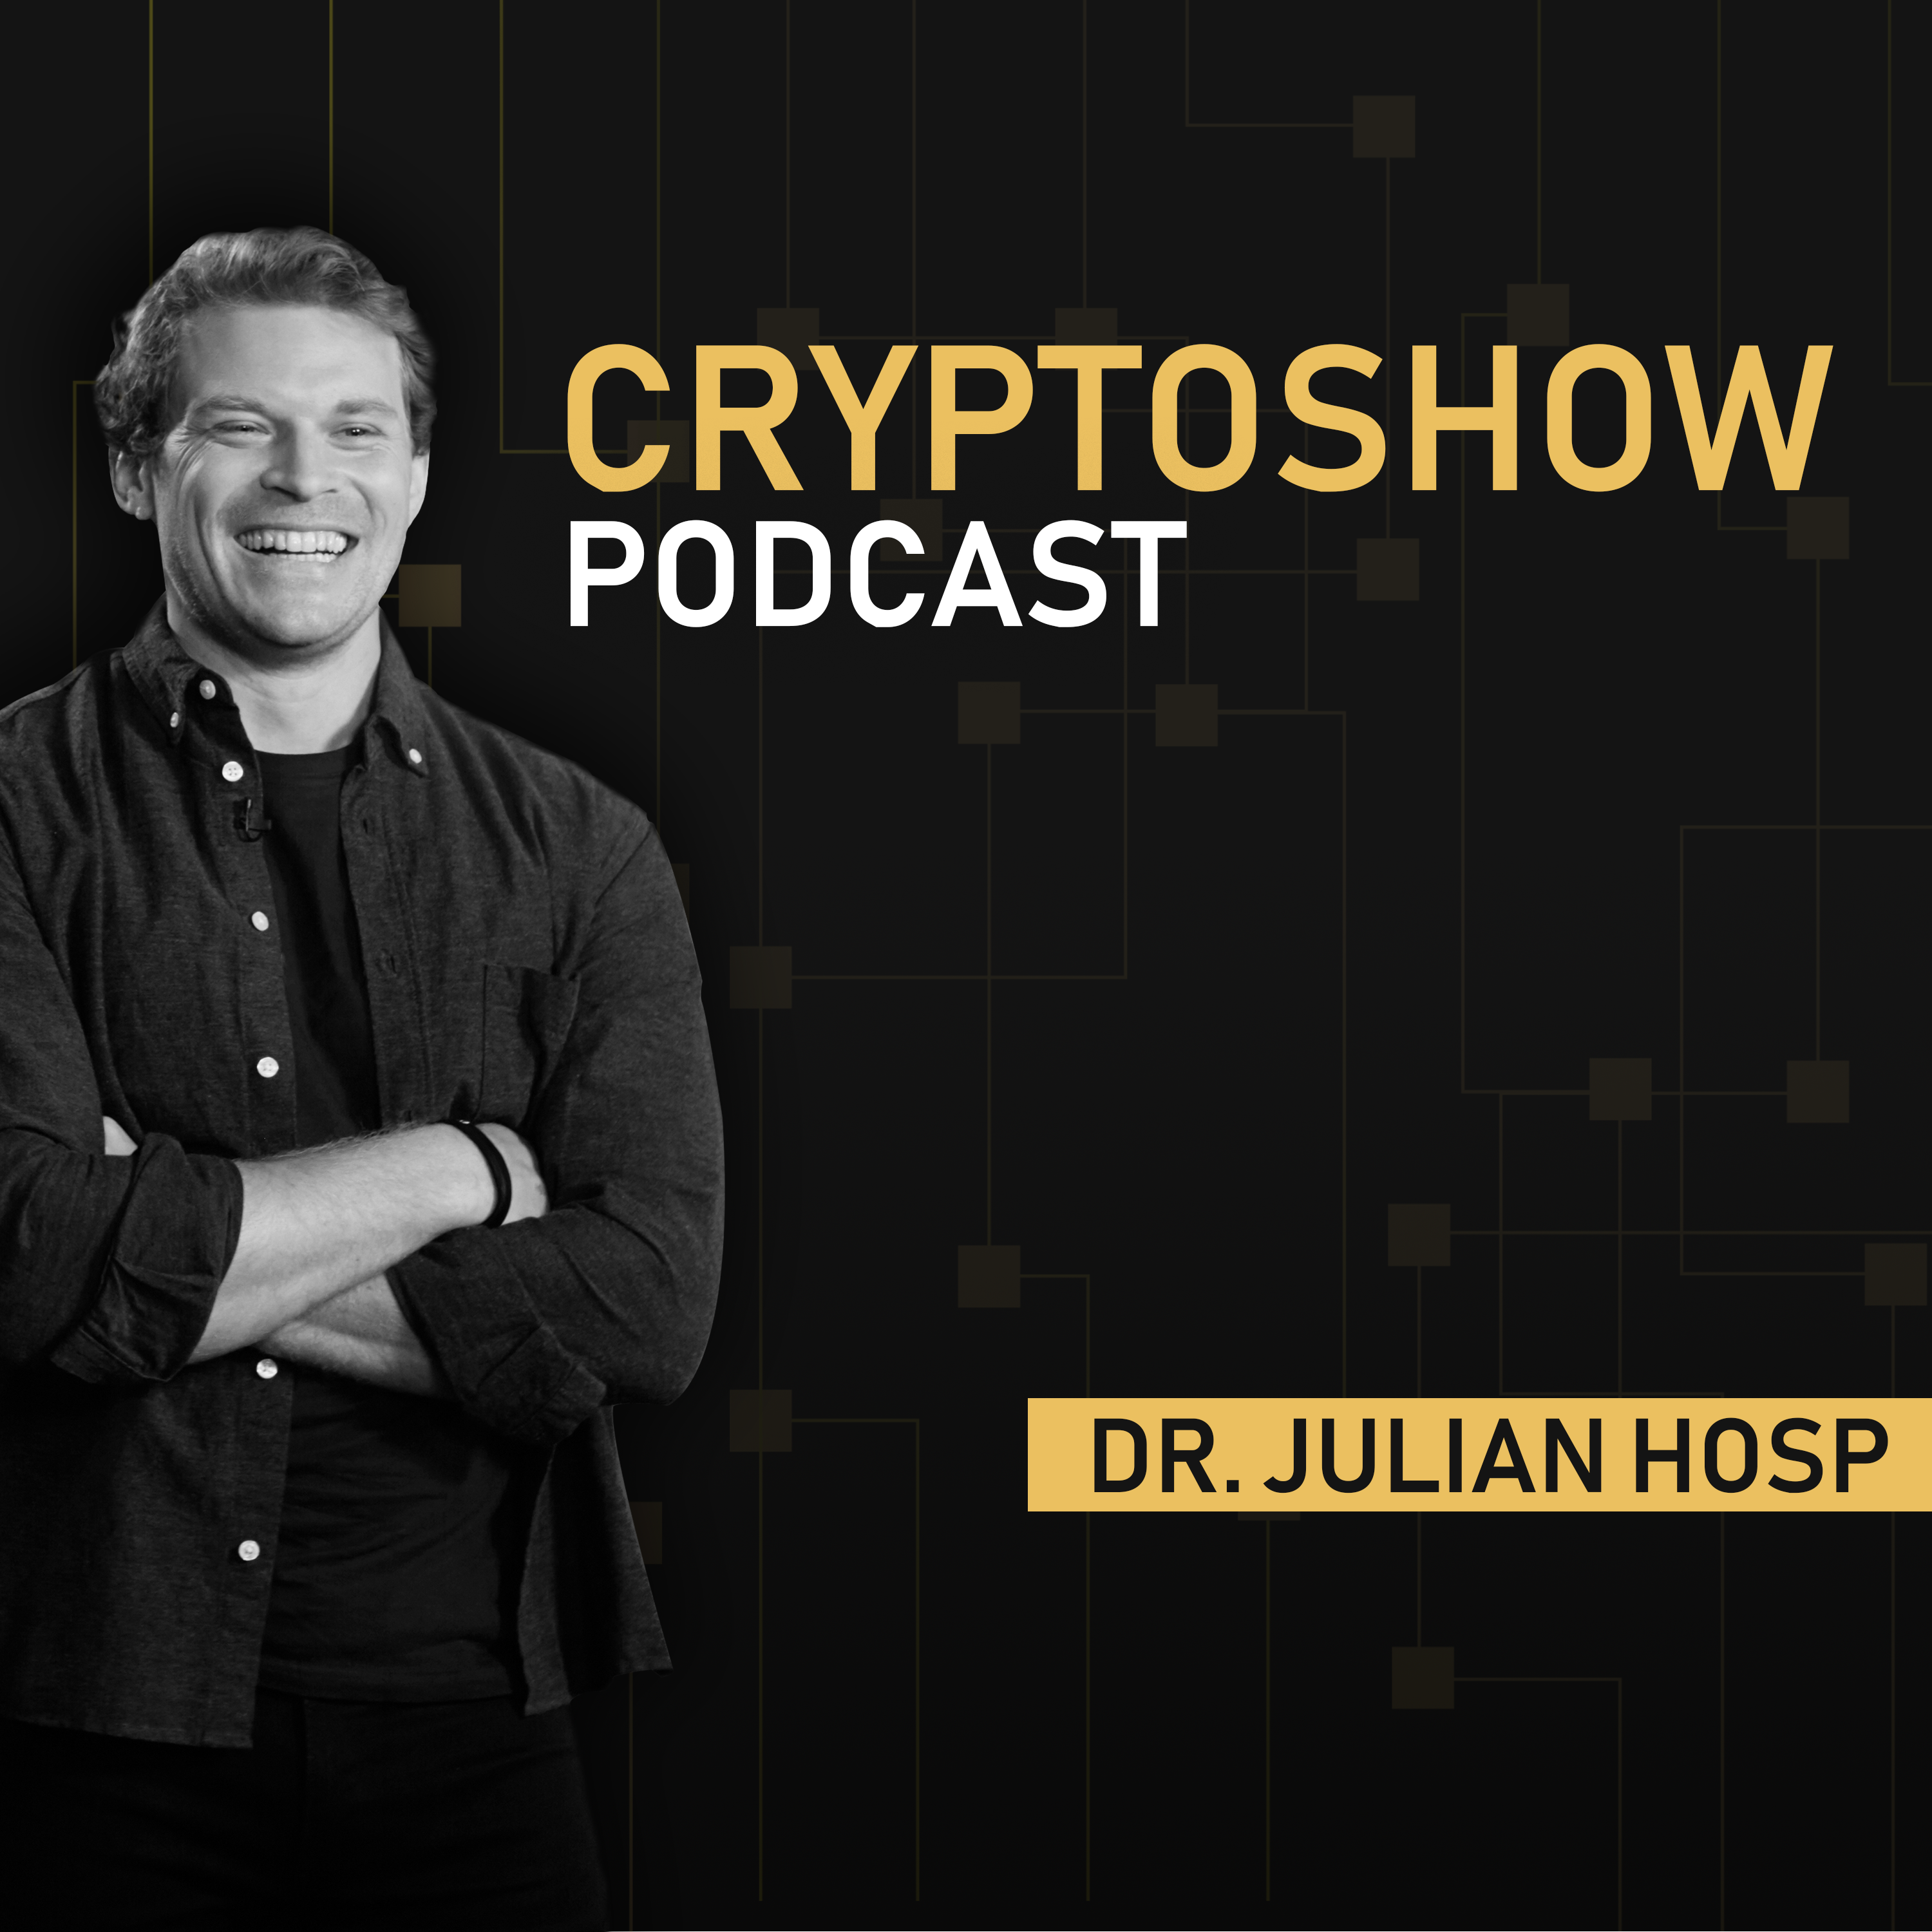 Fresh update on "spotify" discussed on The Cryptoshow - blockchain, cryptocurrencies, Bitcoin and decentralization simply explained